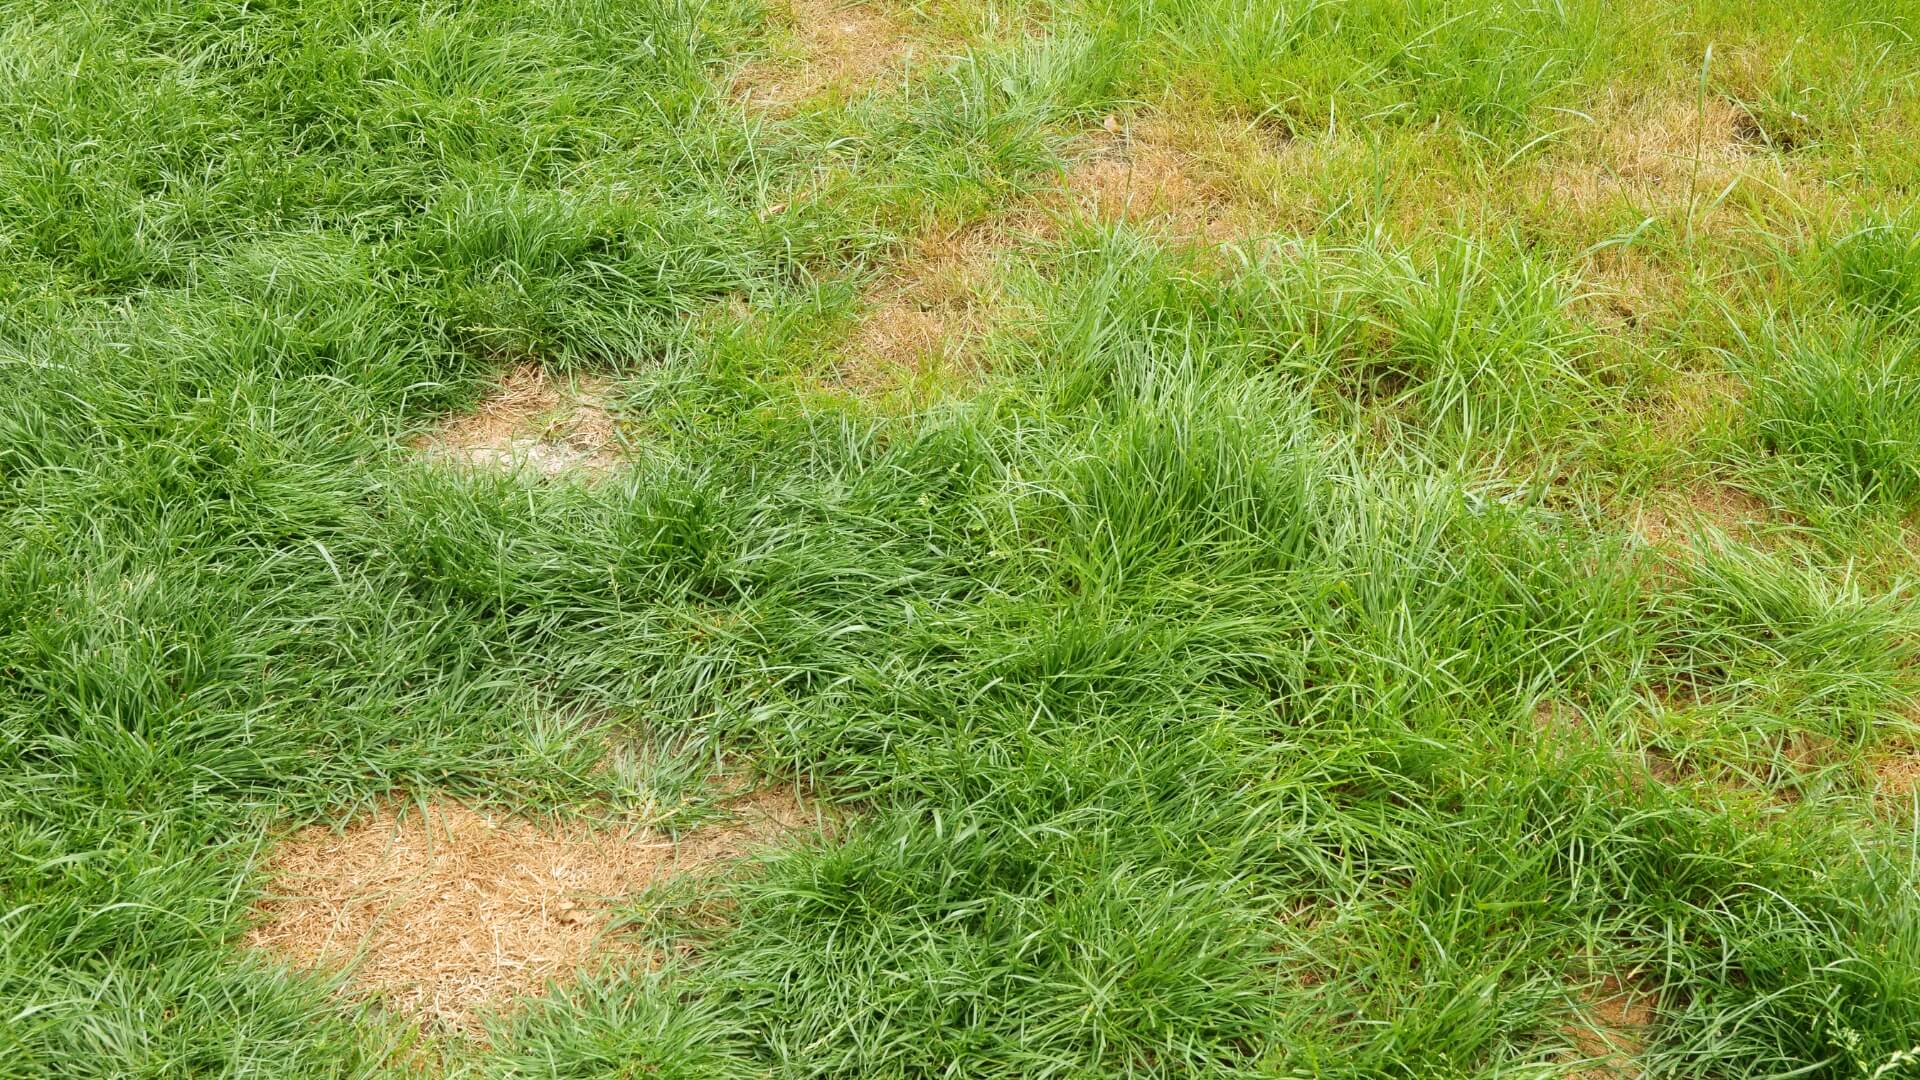 brown-patches-on-lawn-due-to-dog-urine-summer-lawn-care-guide